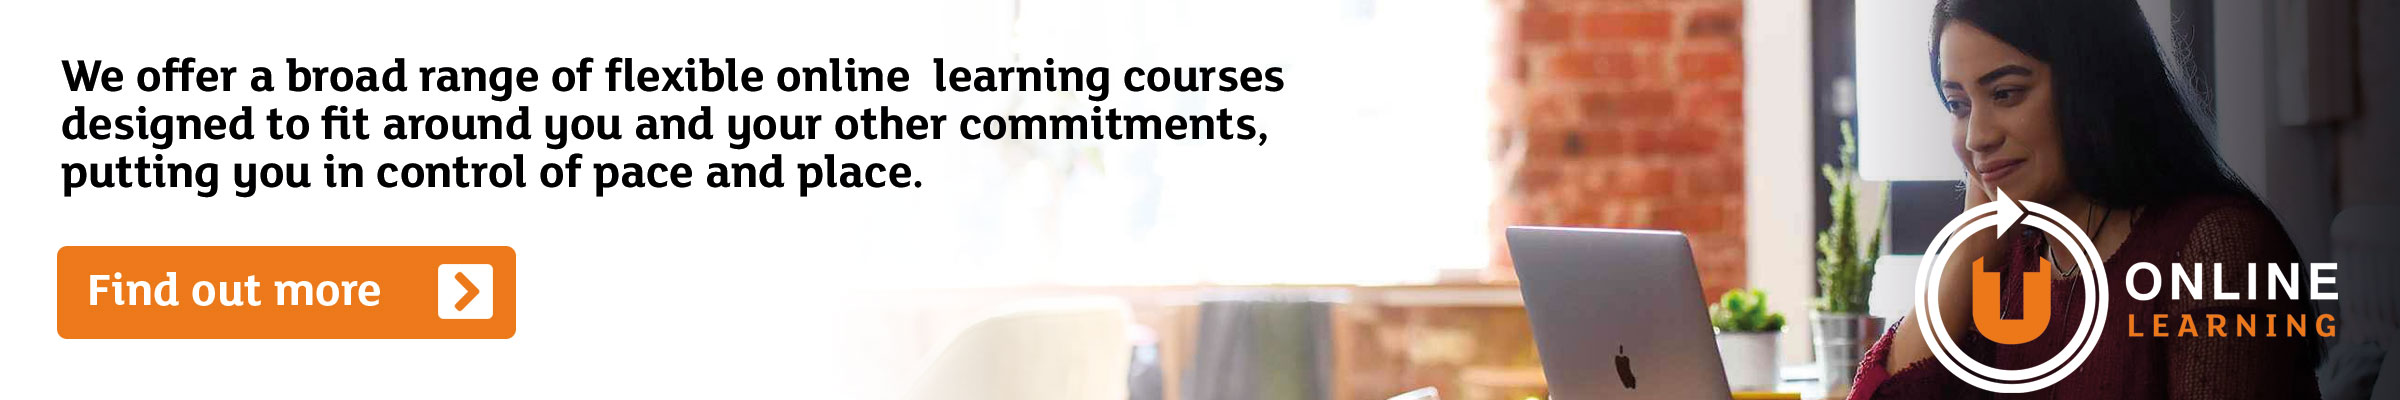 Link to find out more about our broad range of flexible online learning courses designed to fit around you and your other commitments, putting you in control of pace and place.